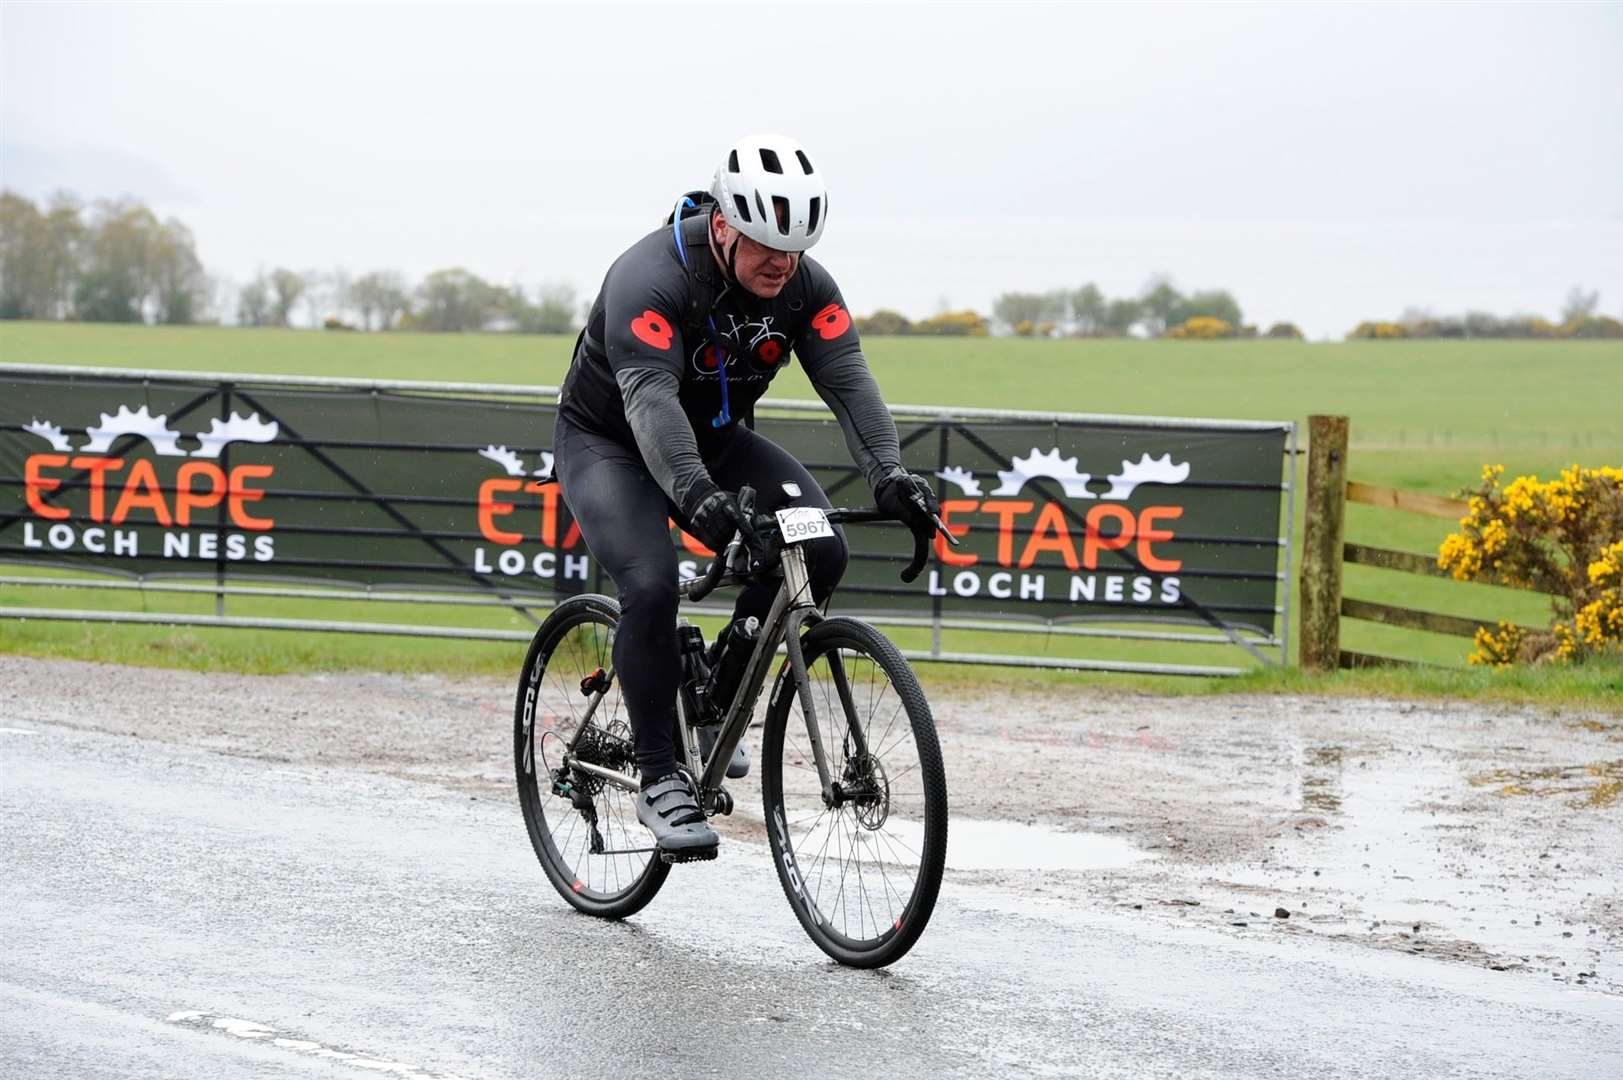 Kev Stewart taking part in the Etape Loch Ness in April as part of his training. Picture courtesy of Etape Loch Ness / Marathon Photos